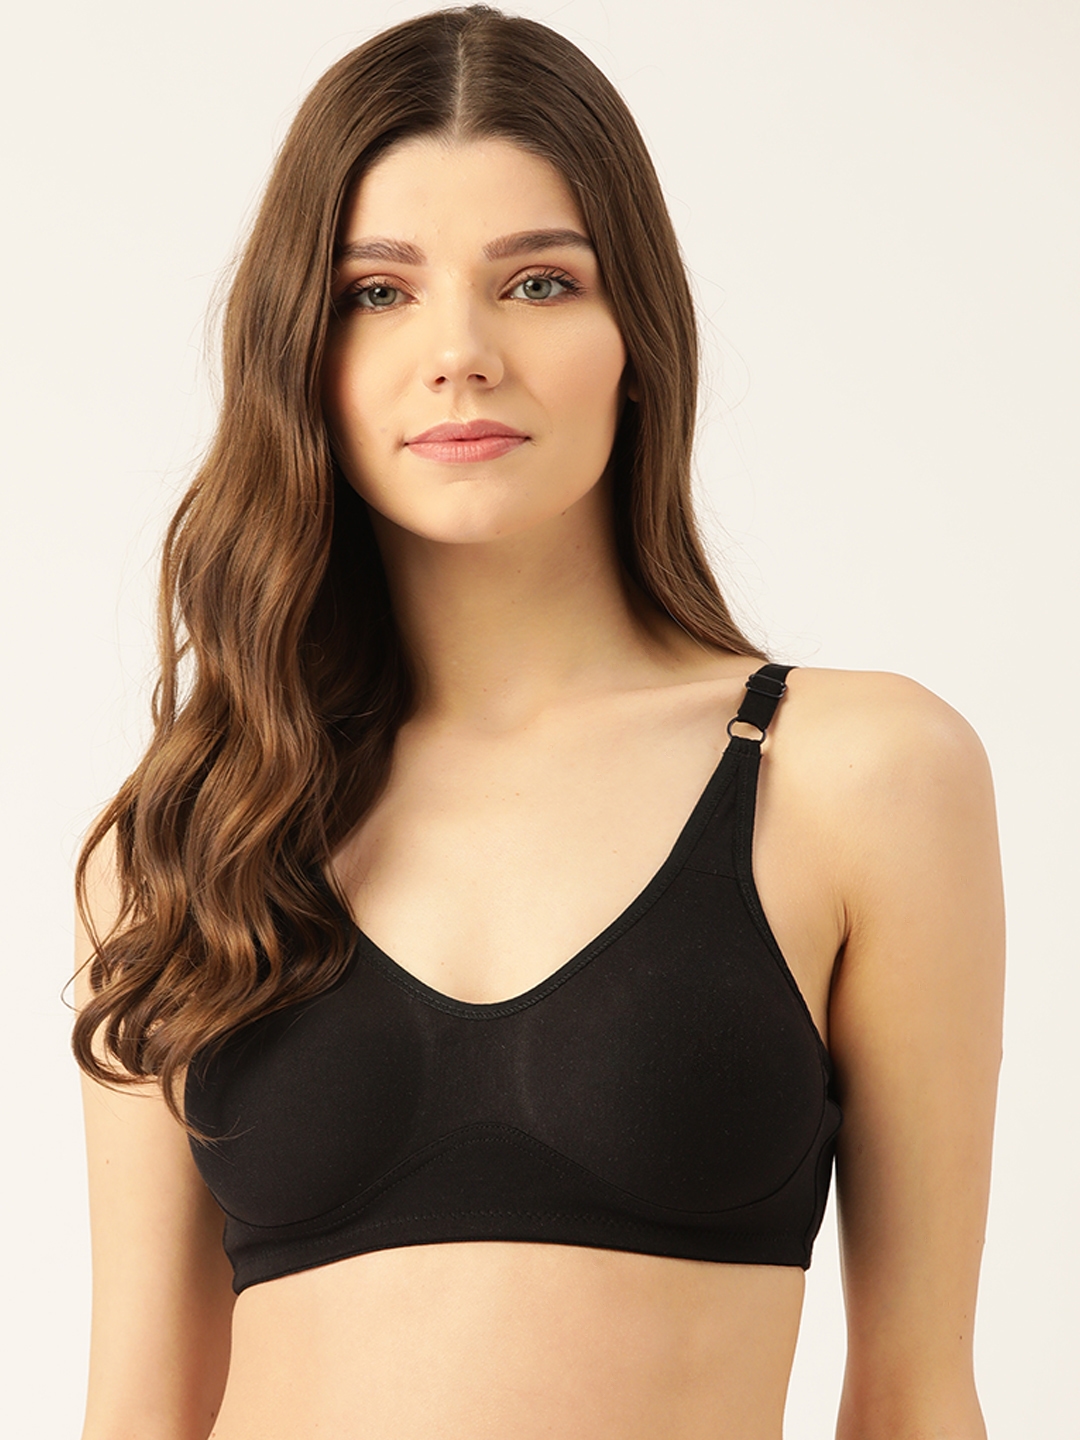 Cotton Solid Non-Wired Padded Women's Bra